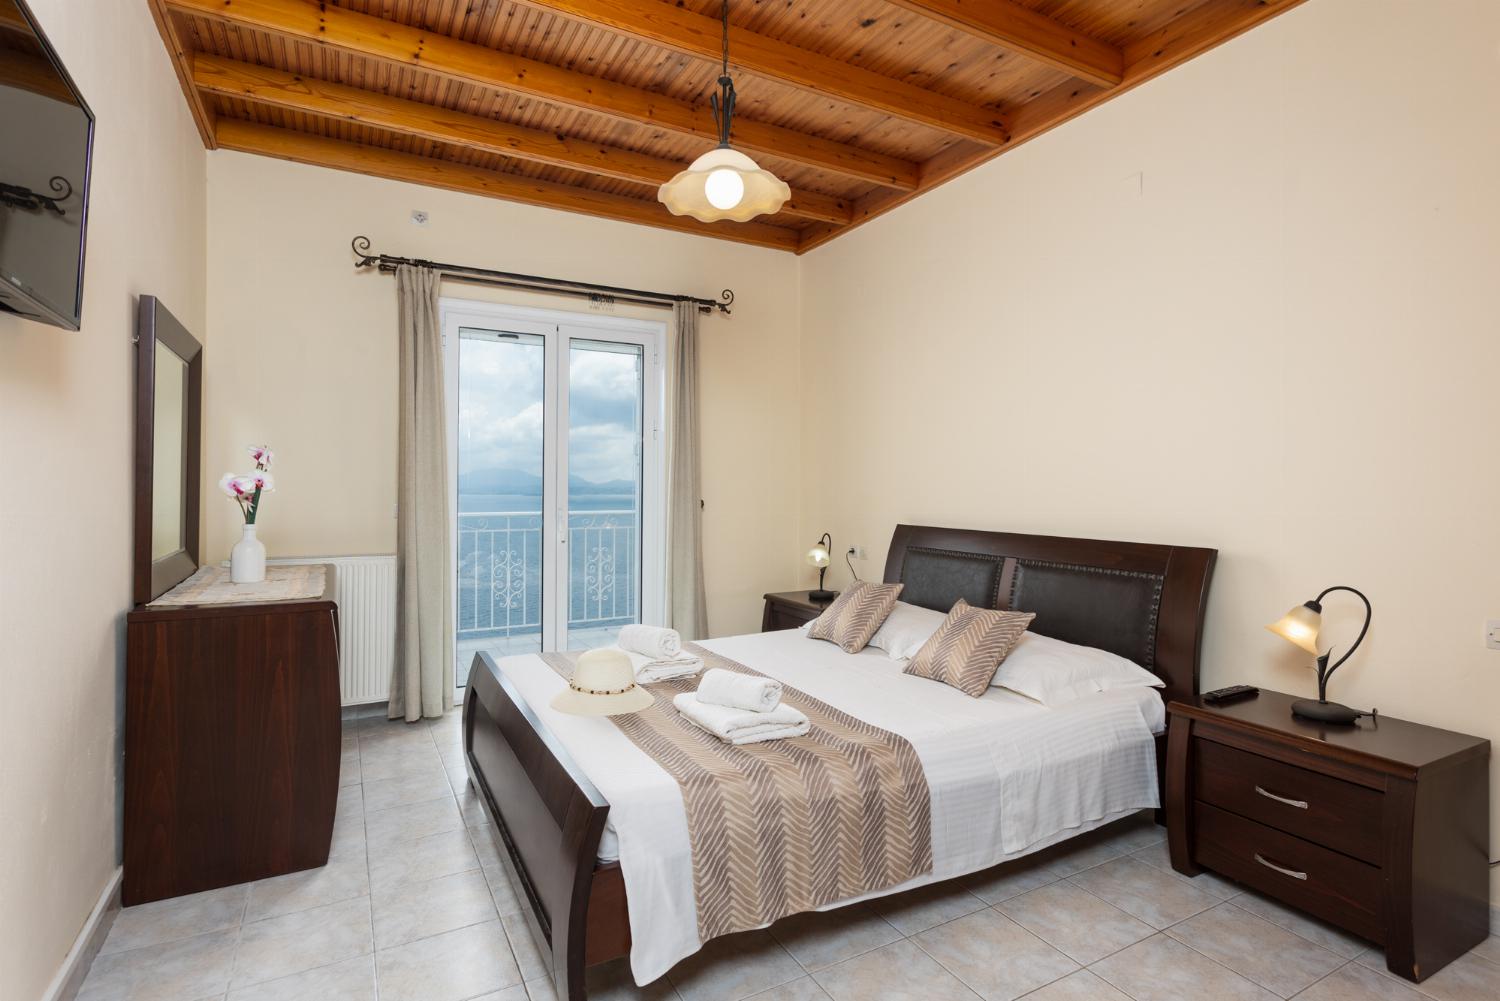 Double bedroom on first floor with TV, sea views, and balcony access